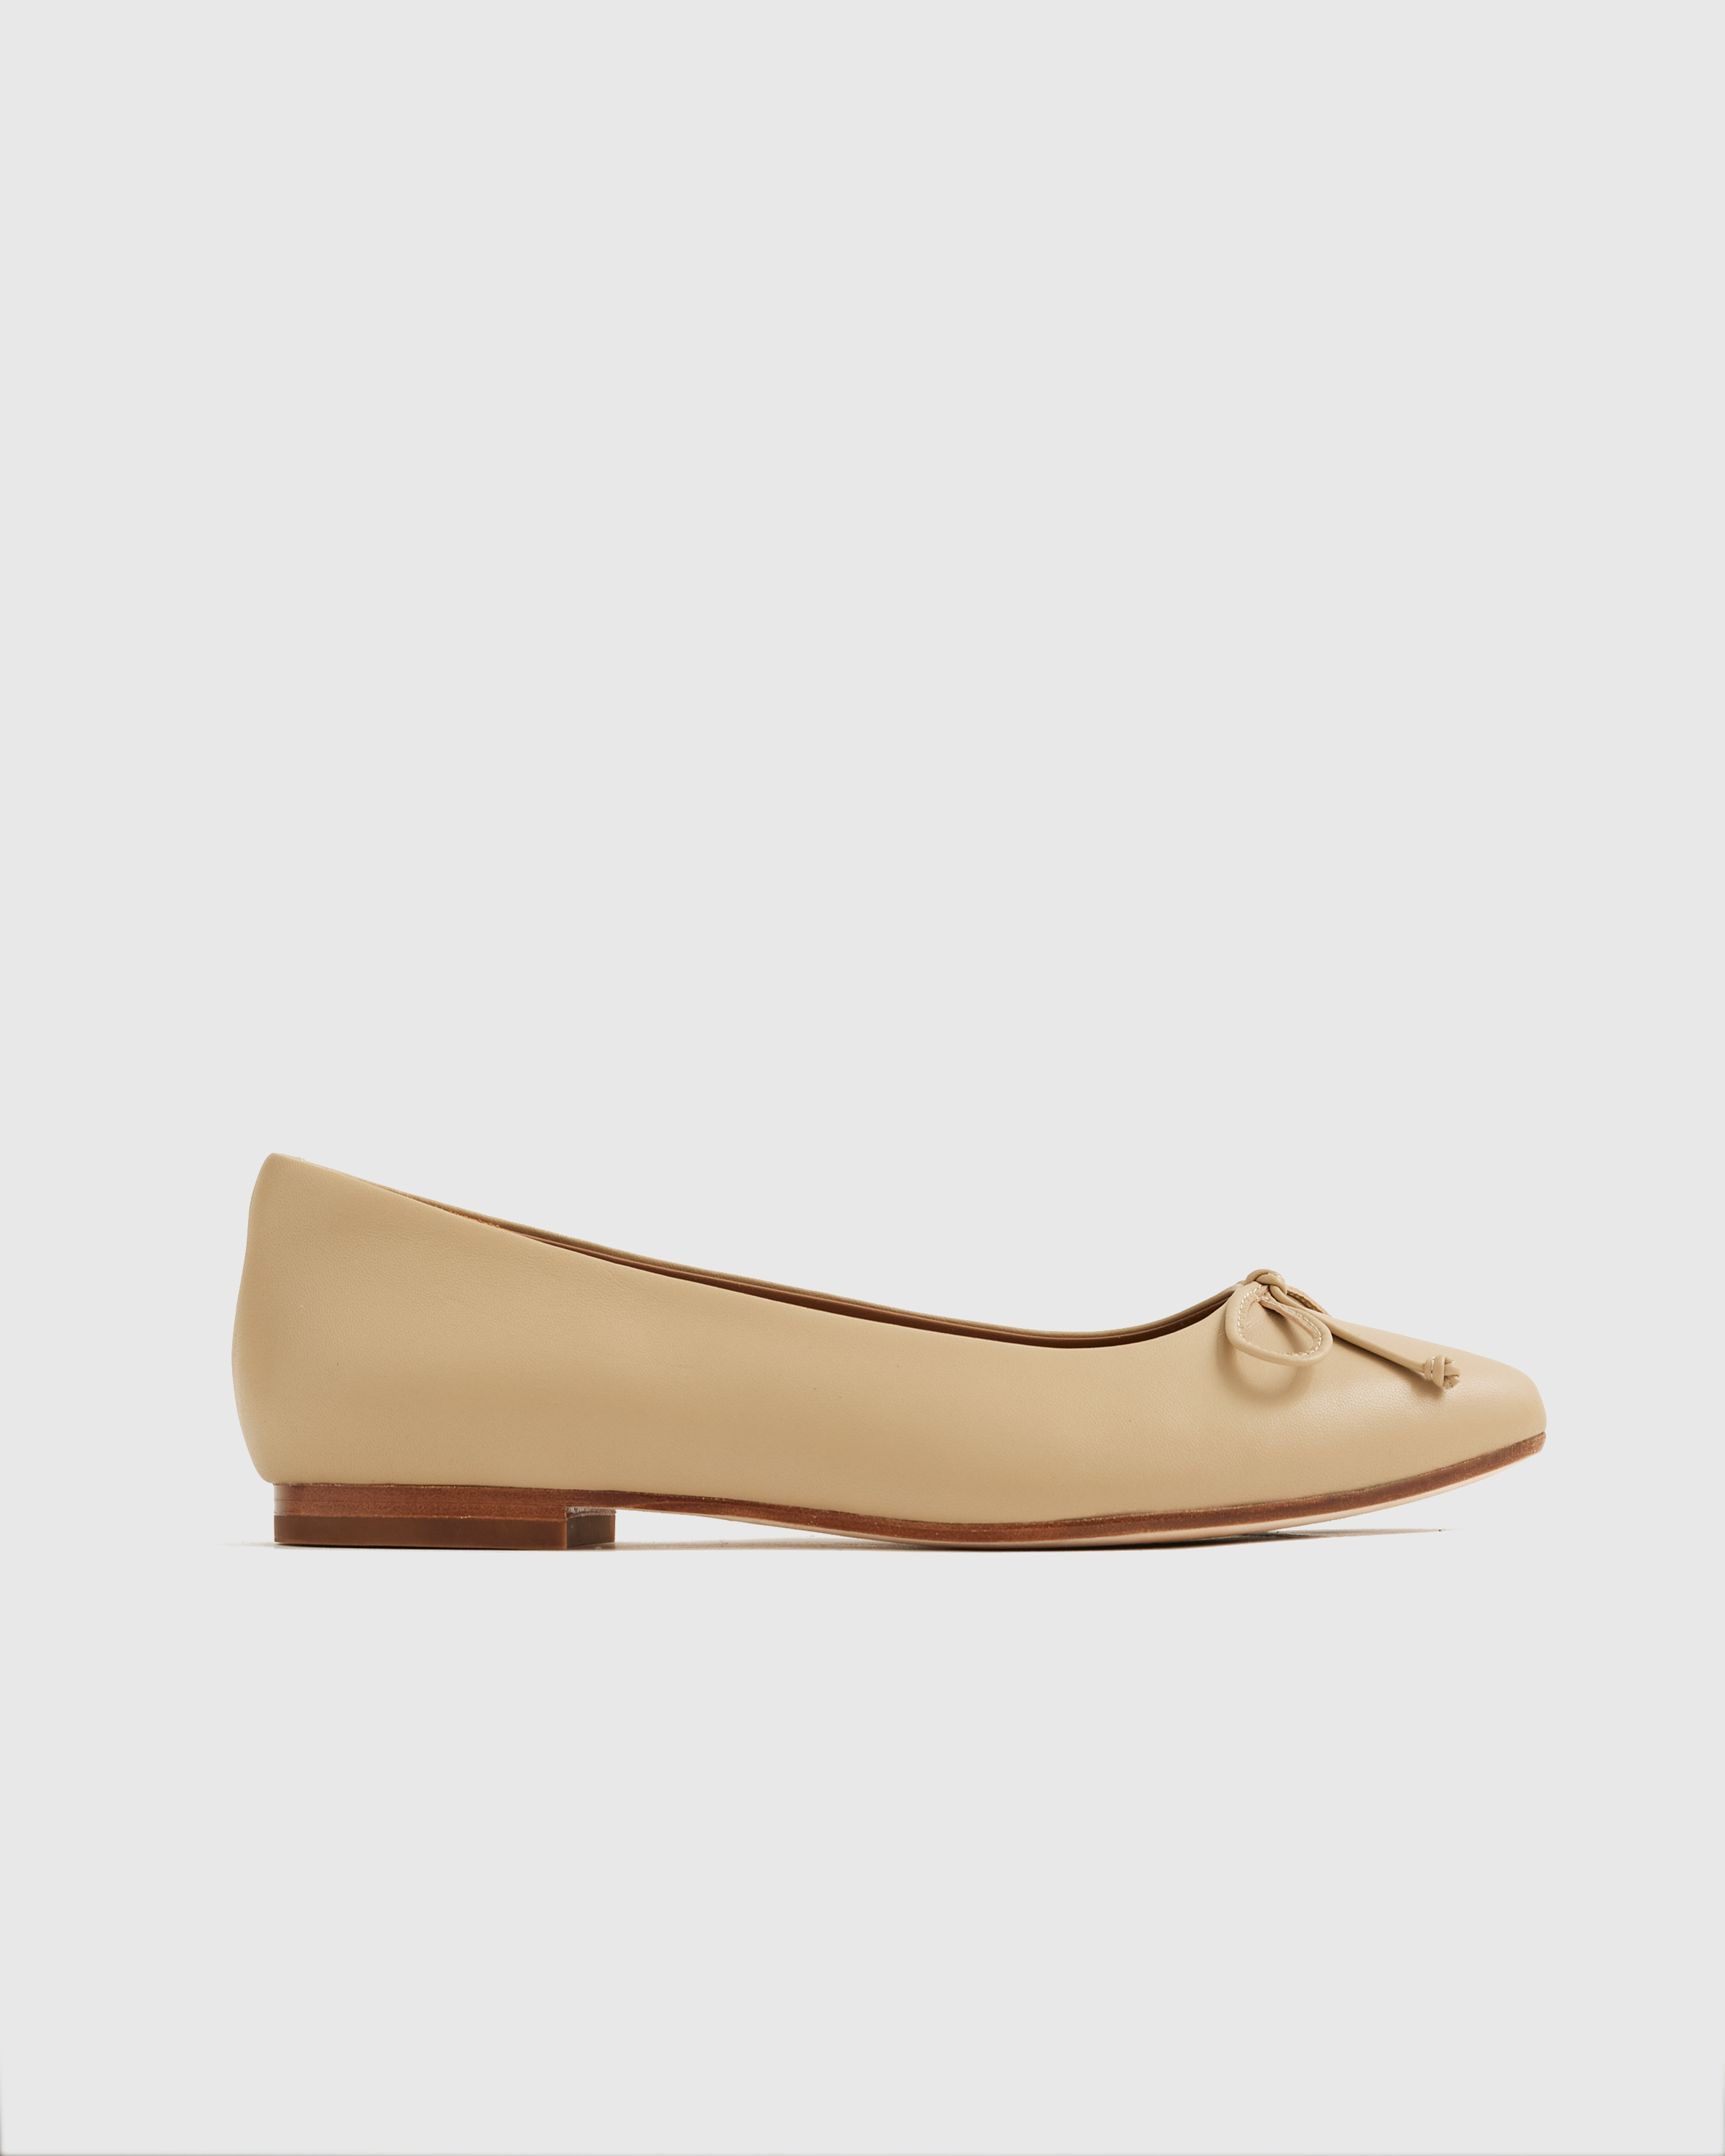 Quince Women's Italian Leather Pointed Bow Flat In Almond